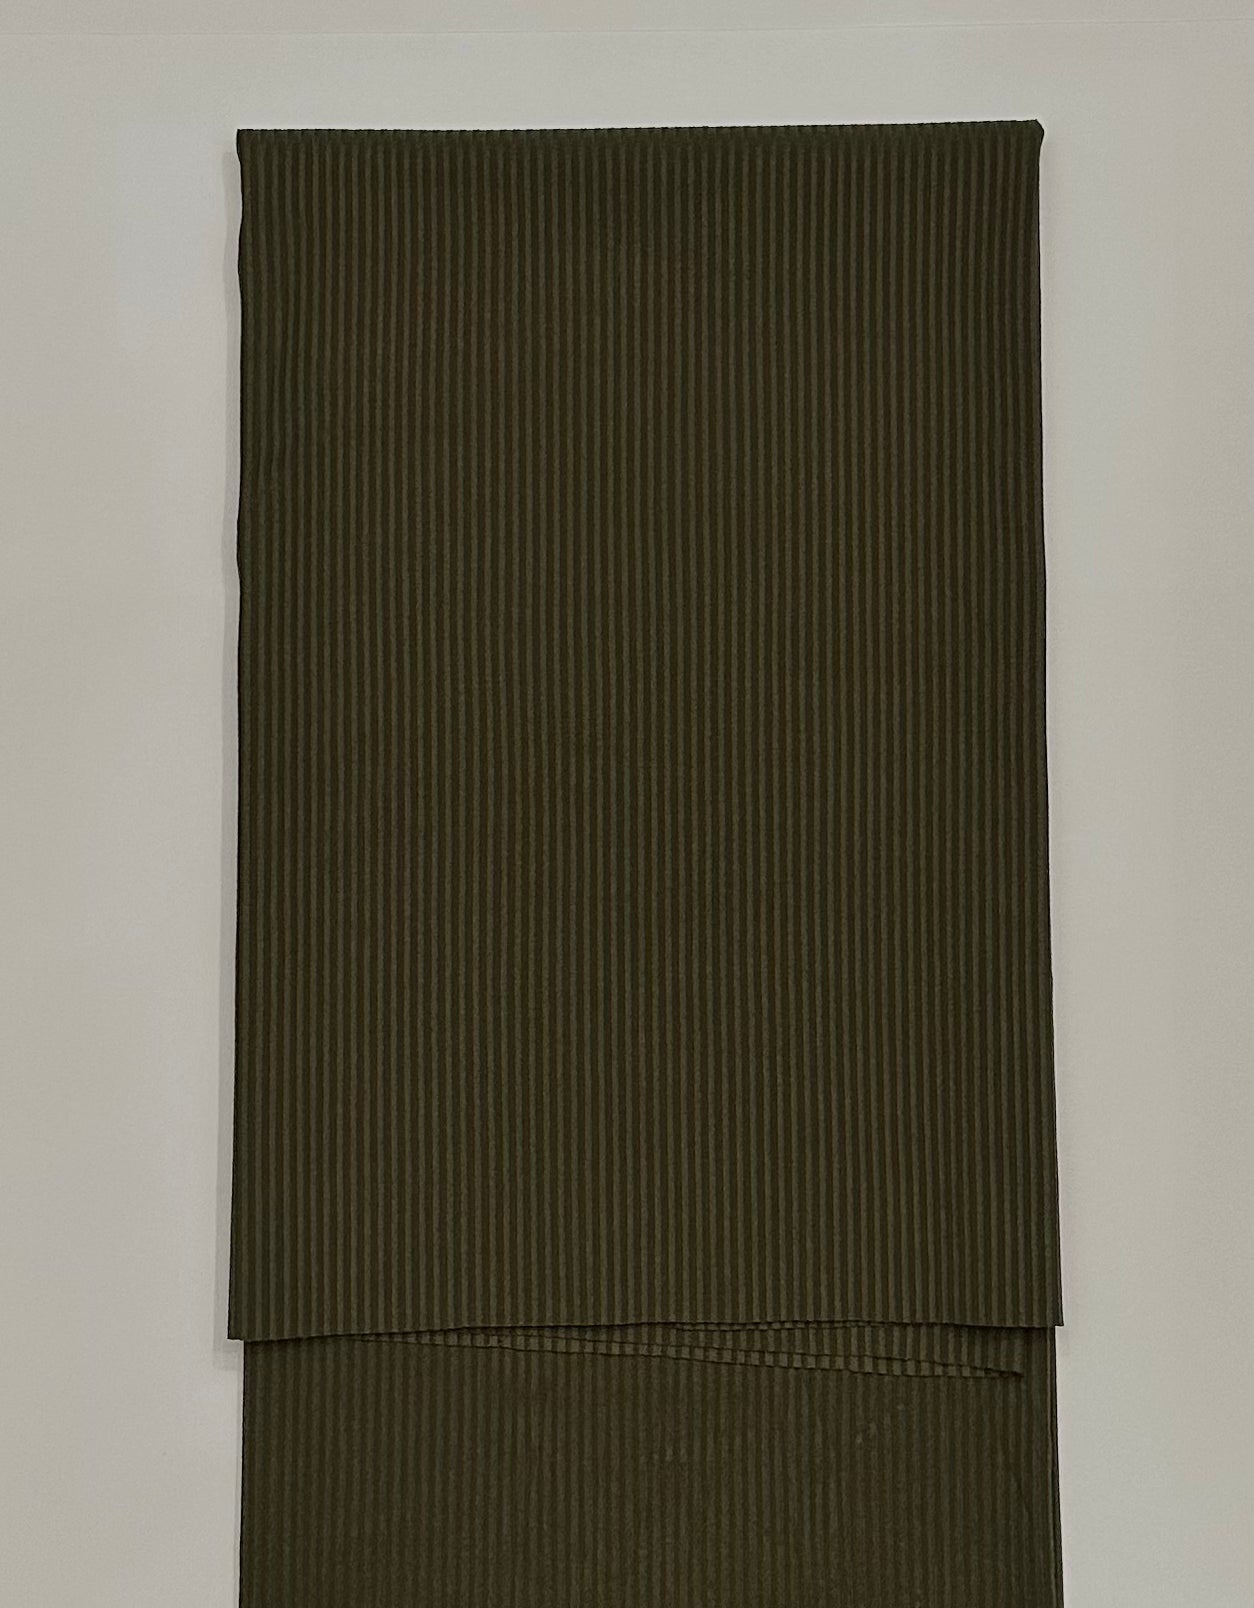 Pre-Order Solid in Army Green (new) on Unbrushed Rib Knit Fabric Sold by the 1/4 yard